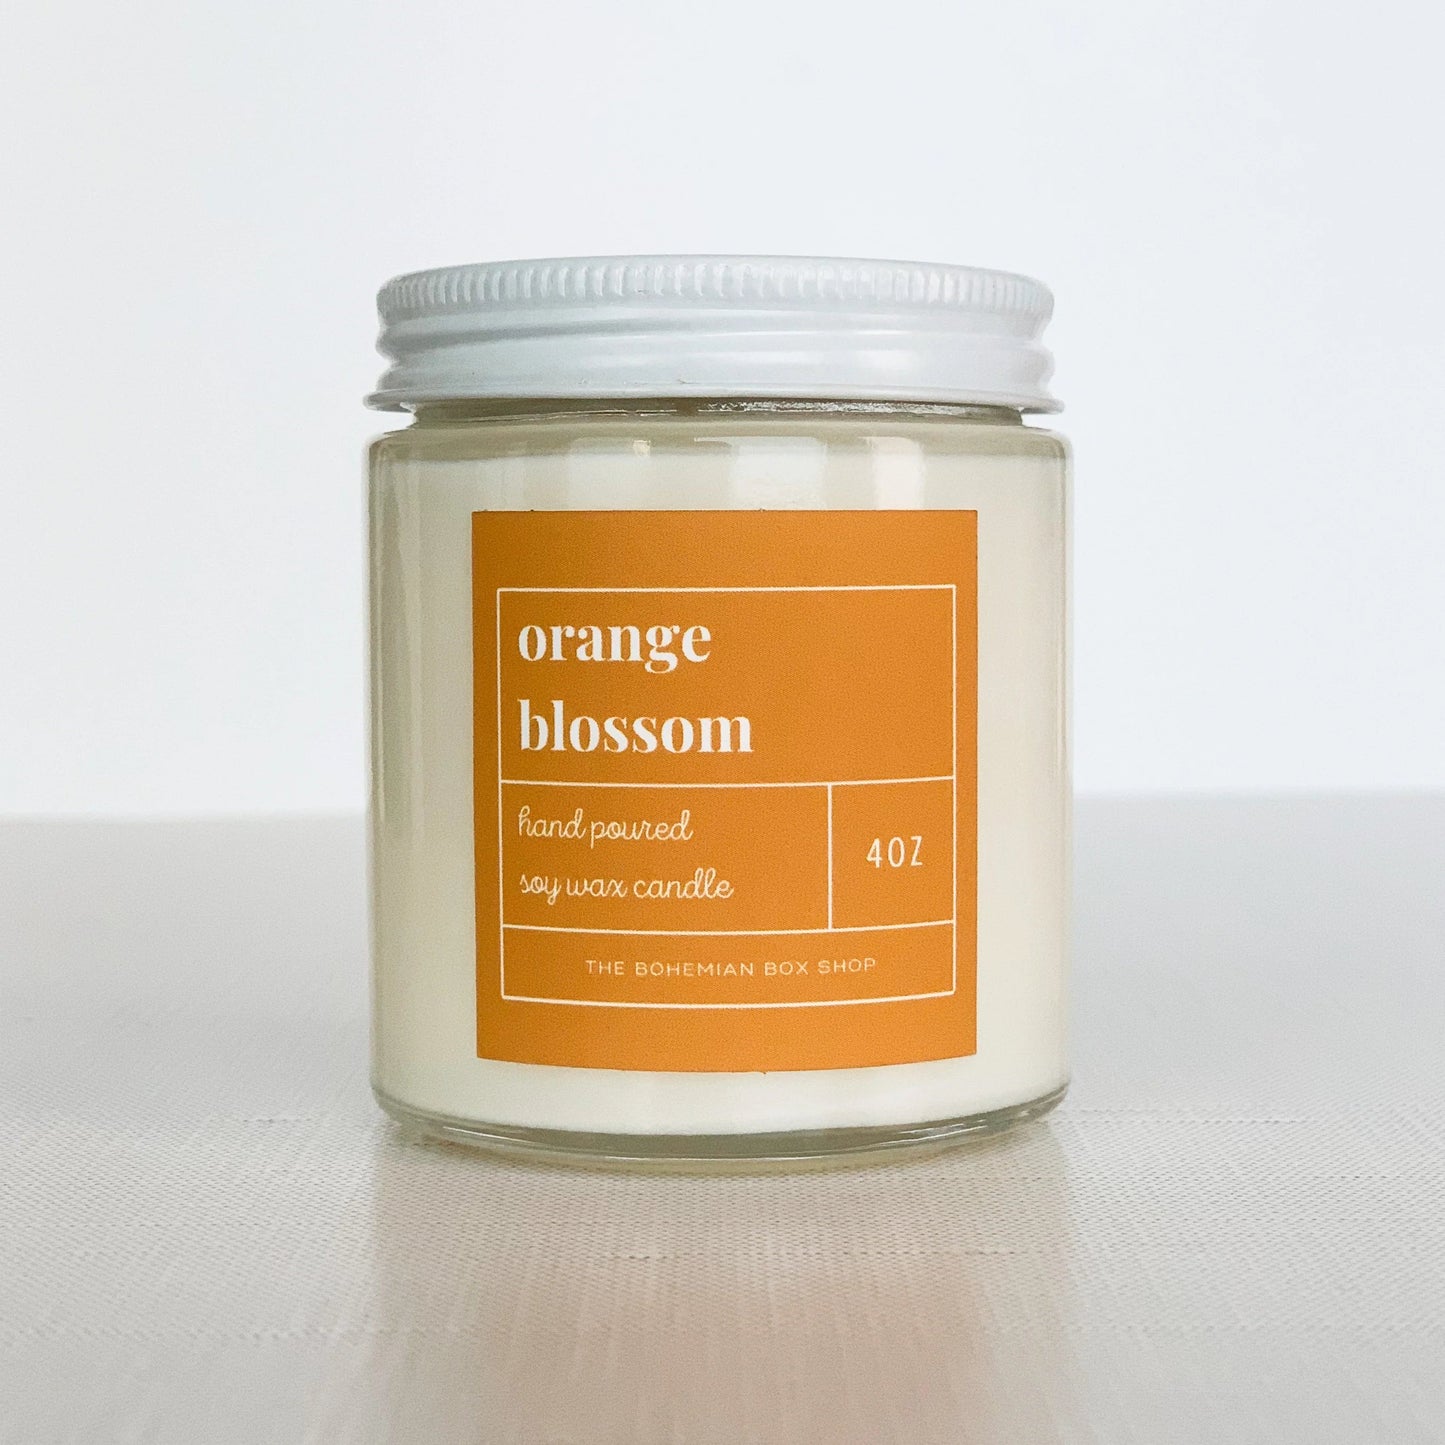 4 ounce orange blossom soy candle with orange label, clear jar, and white lid.